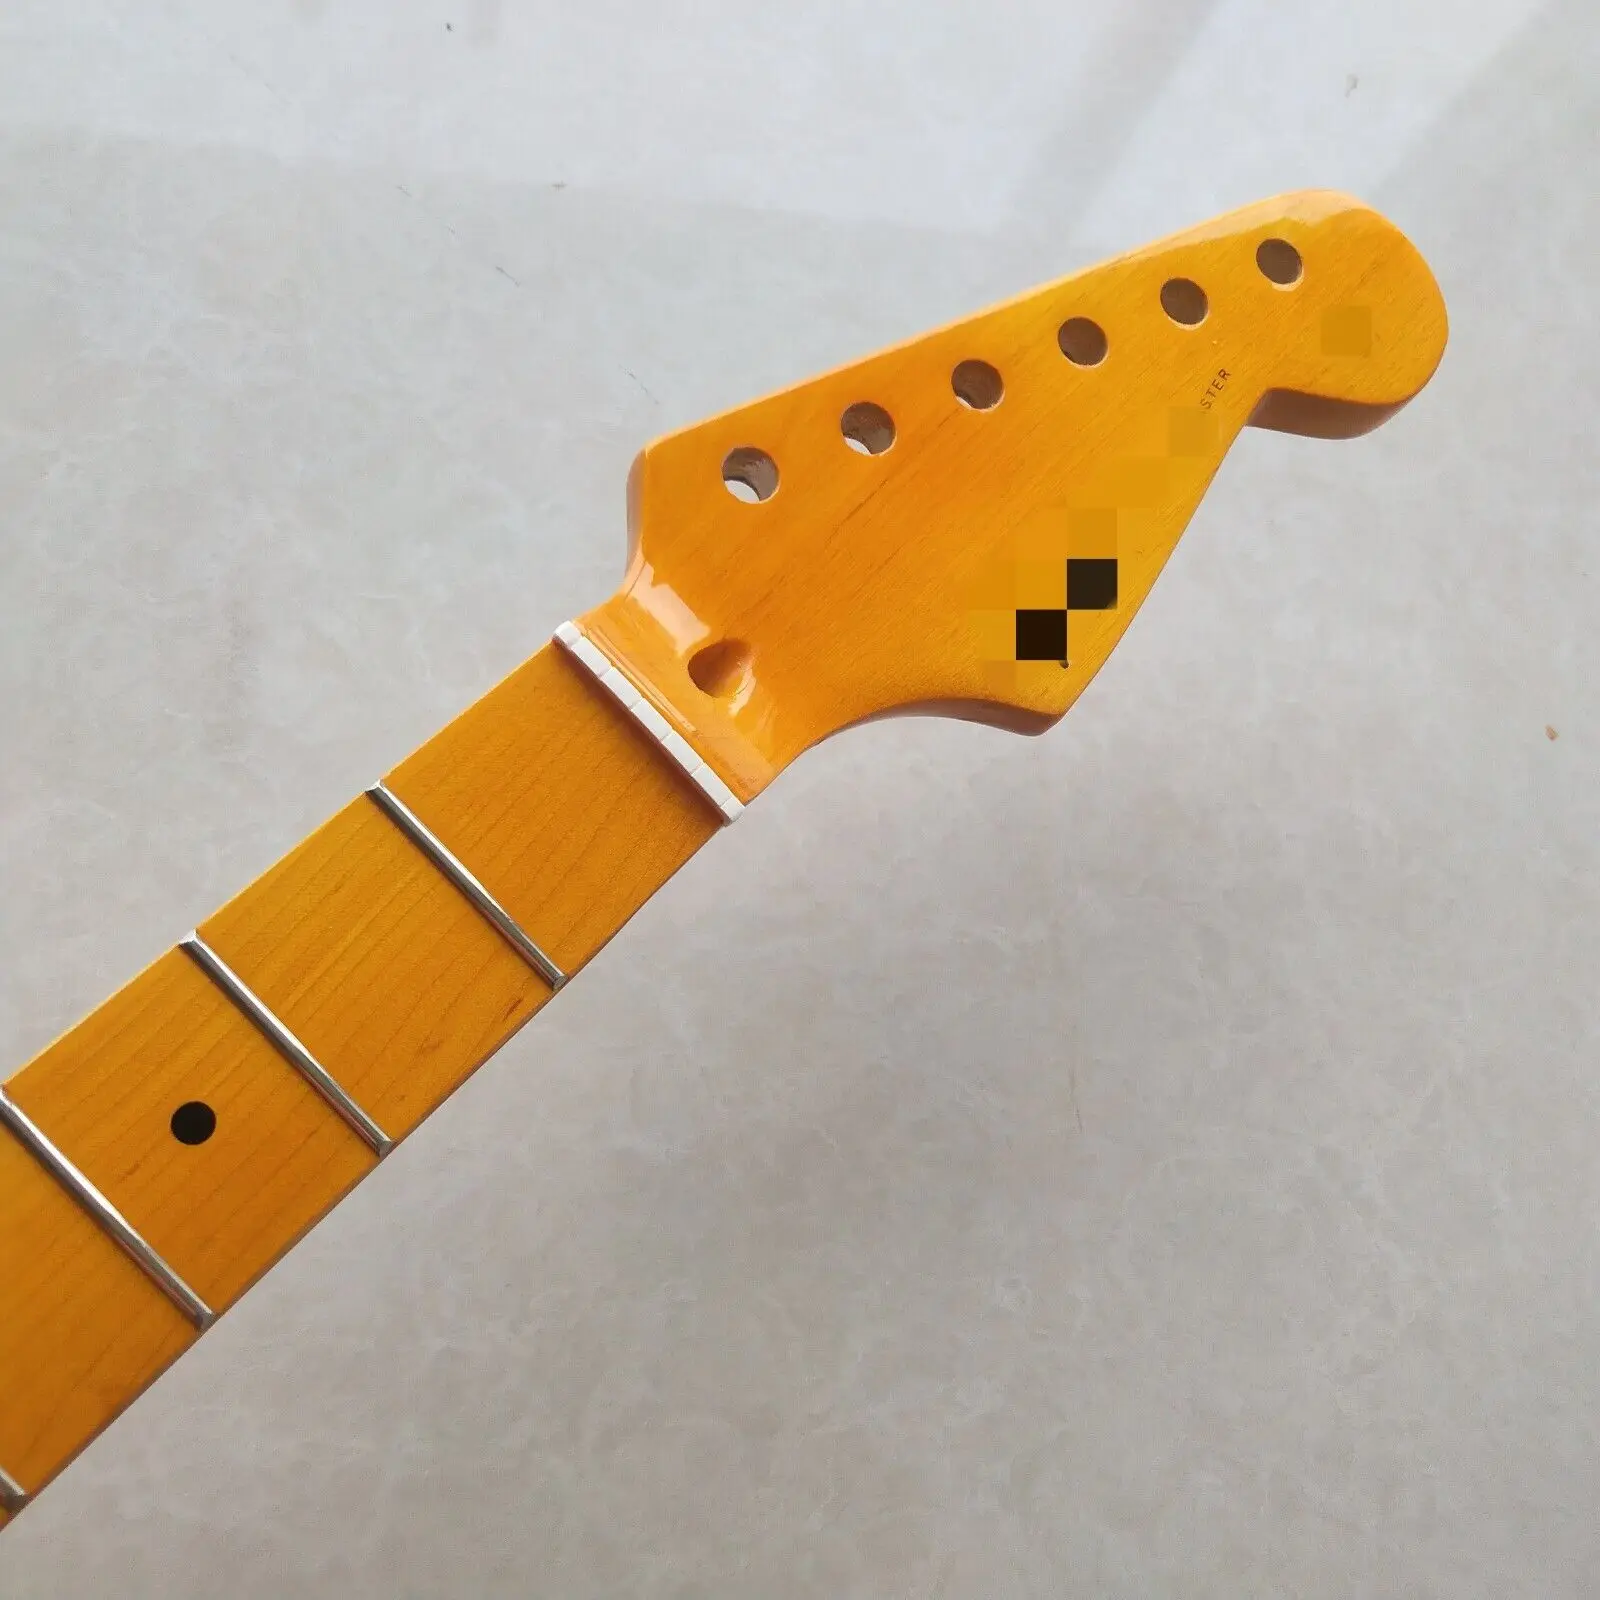 Enlarge Maple DIY parts Yellow Electric Guitar Neck 22 Frets 25.5inch Maple Fingerboard